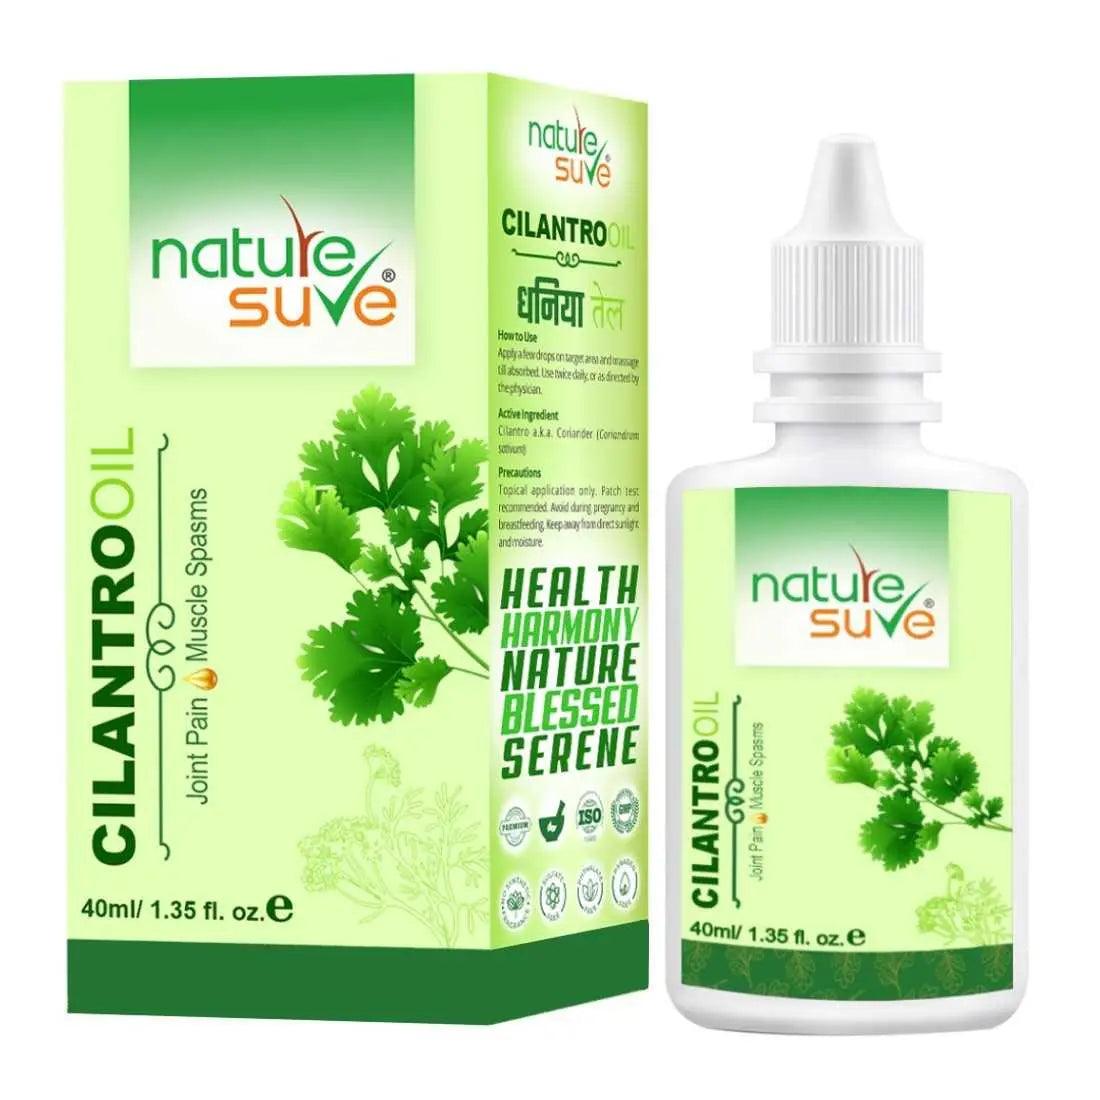 Nature Sure Cilantro Dhania Oil for Joint Pain and Muscle Spasms in Men & Women - 40ml 8906116281055